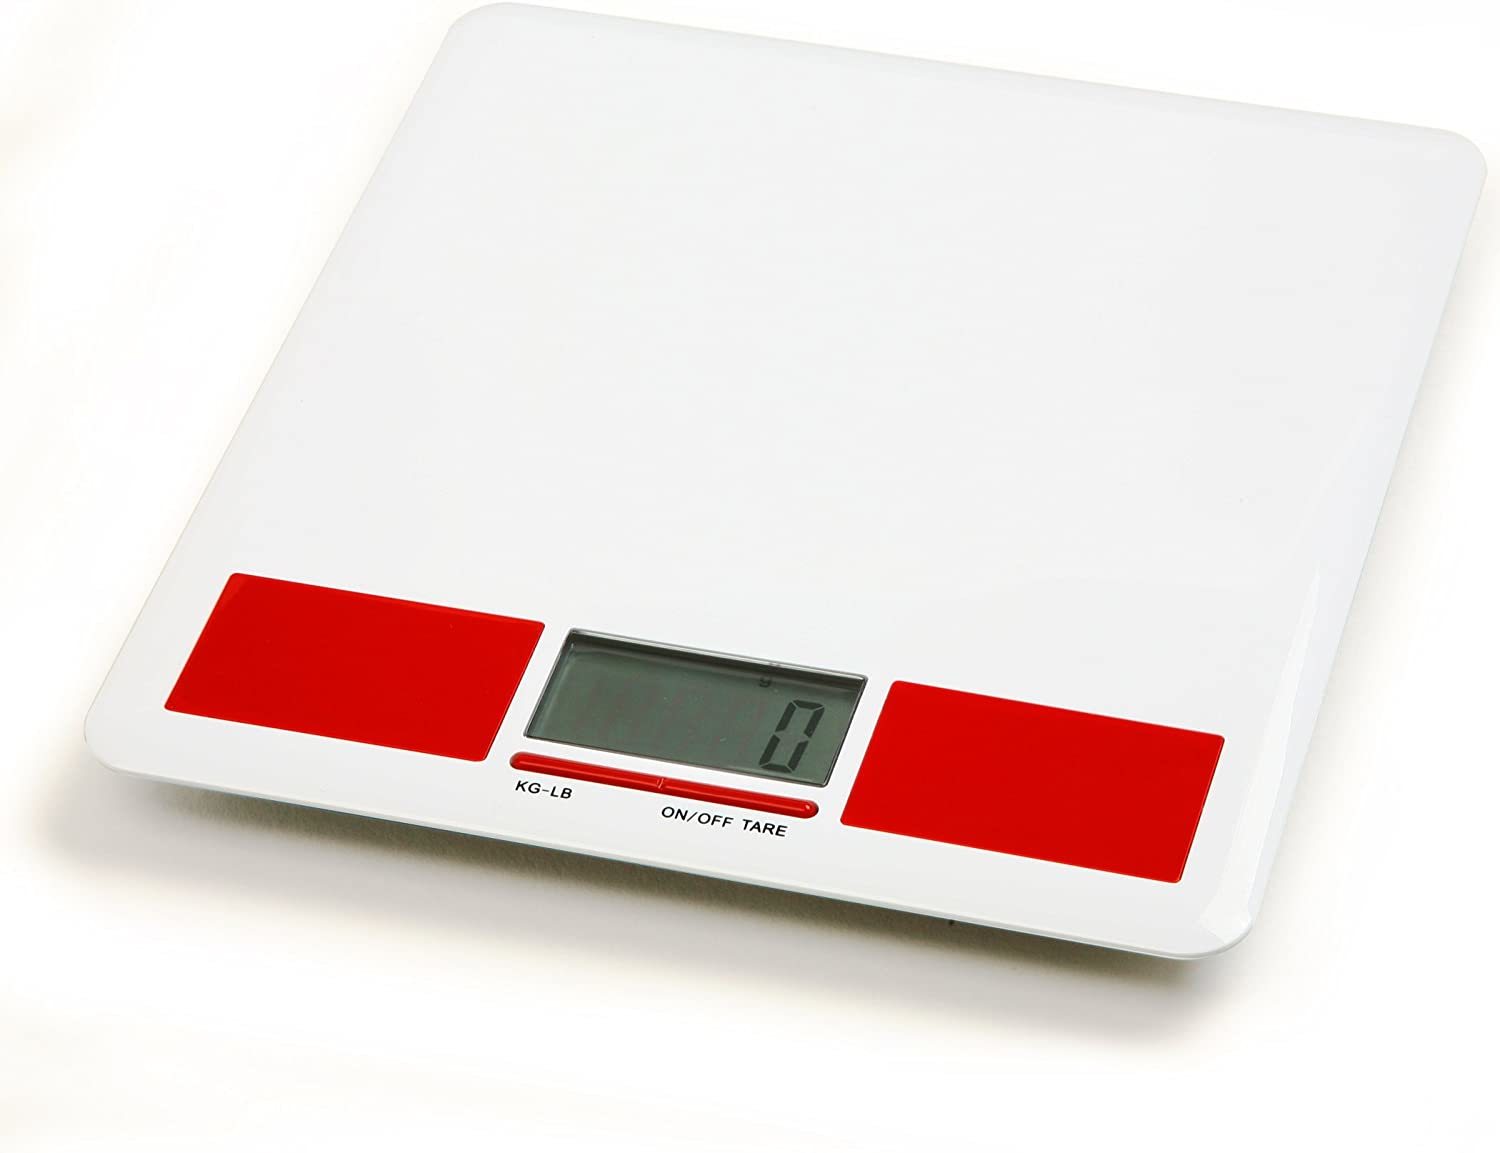 Norpro Digital Diet Kitchen Scale Weighs Up To 11 Pounds (5 Kg), White-Red - $38.99